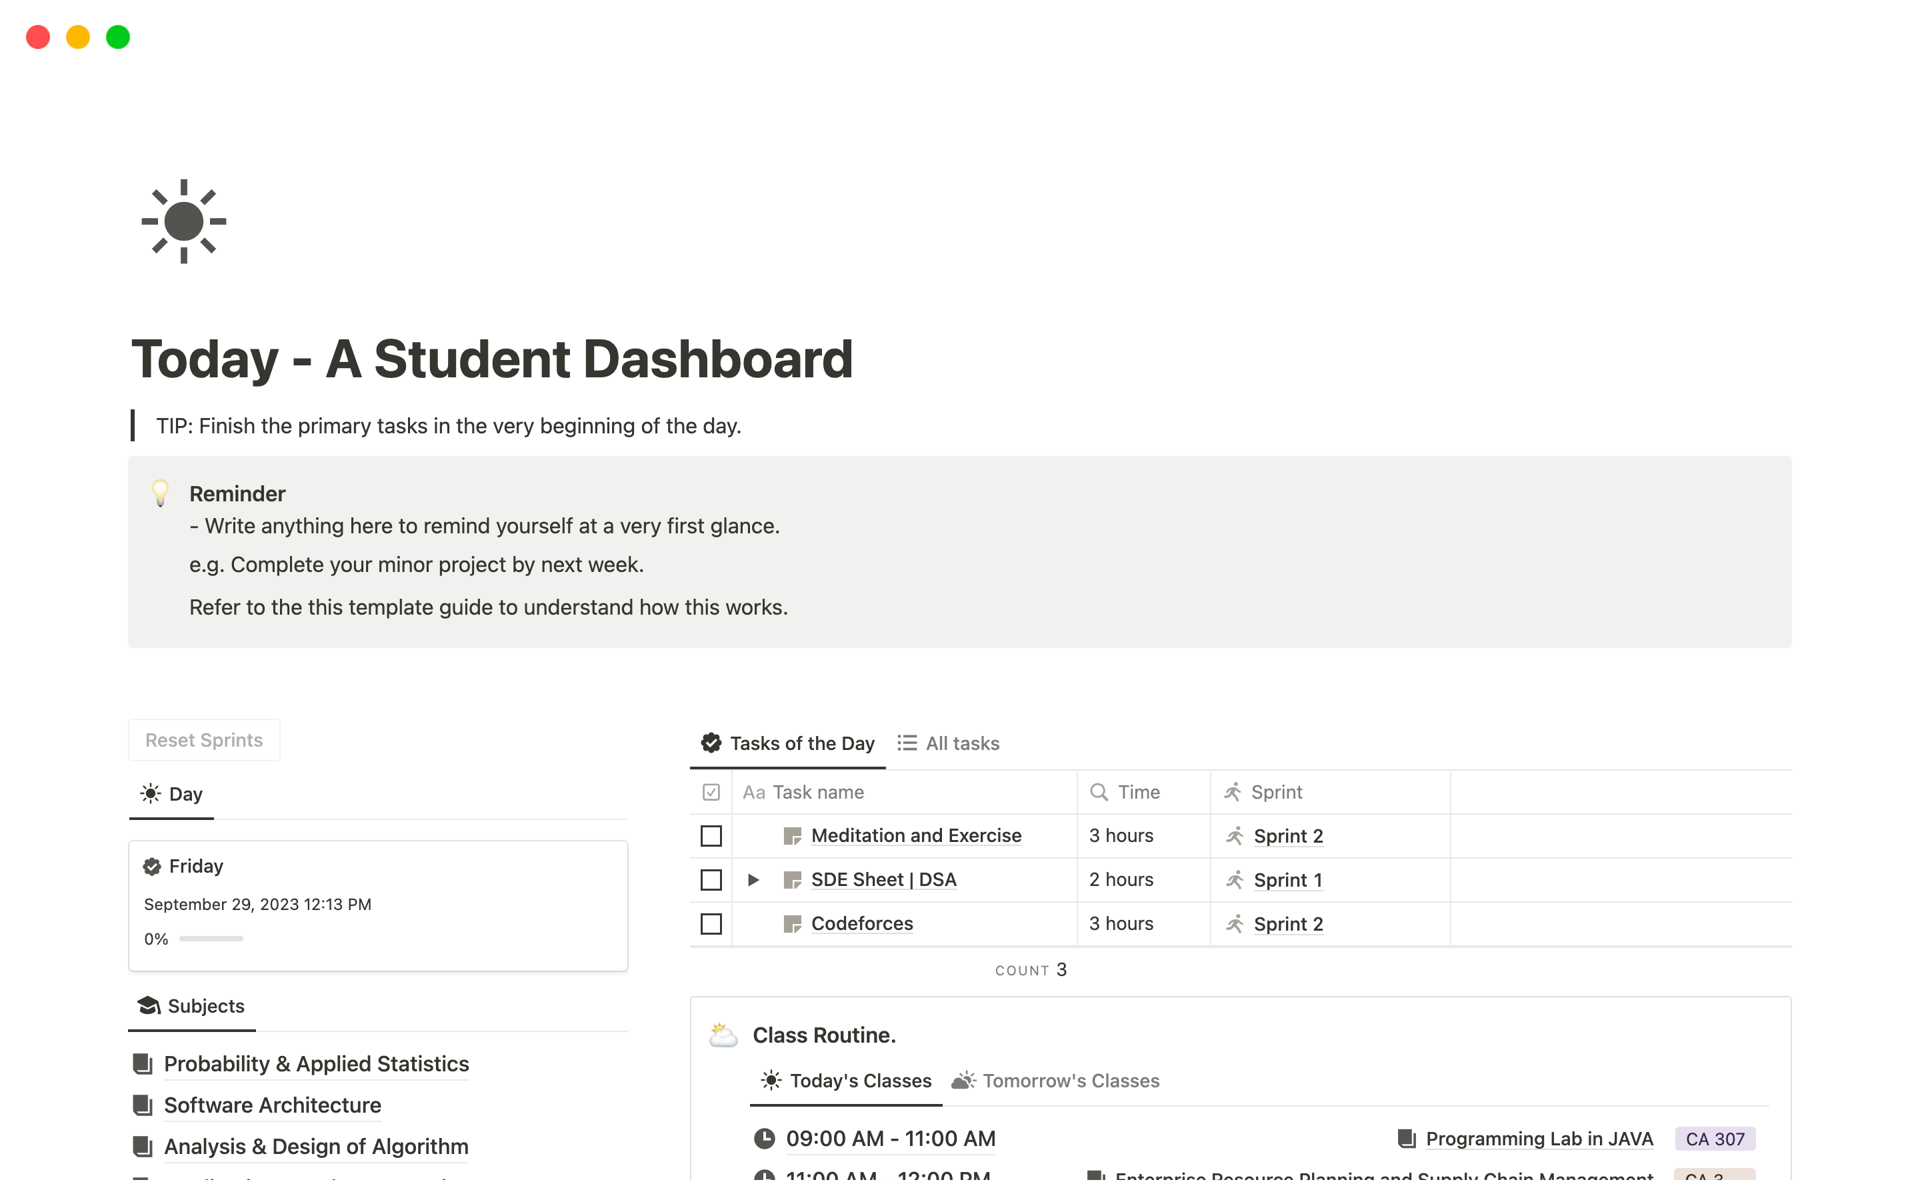 Sharing my personal Notion dashboard that I have been using as student for so long.